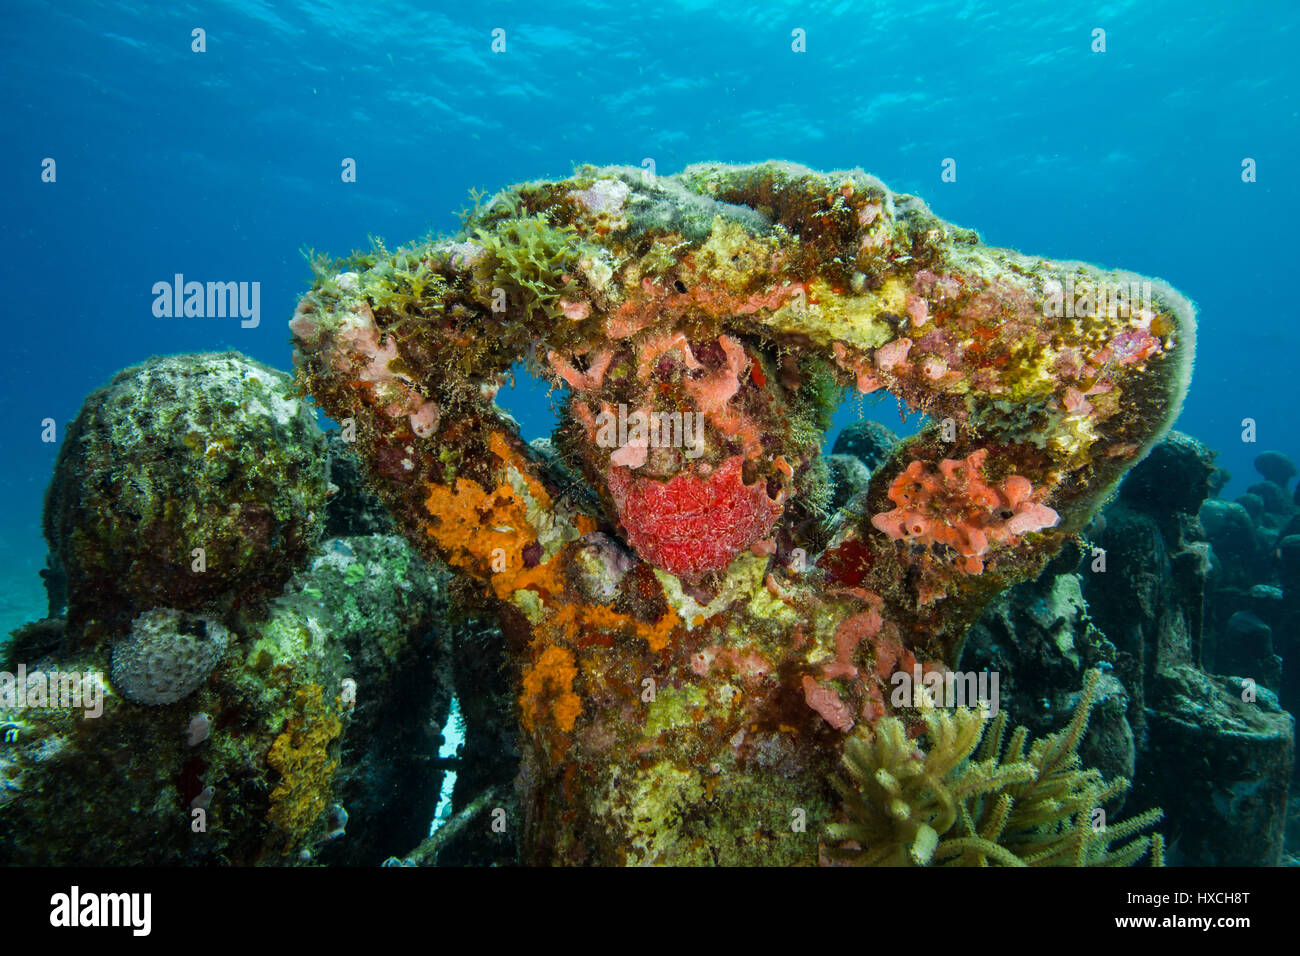 Silent Evolution sculpture encusted with colourful new life, at the MUSA underwater museum Stock Photo